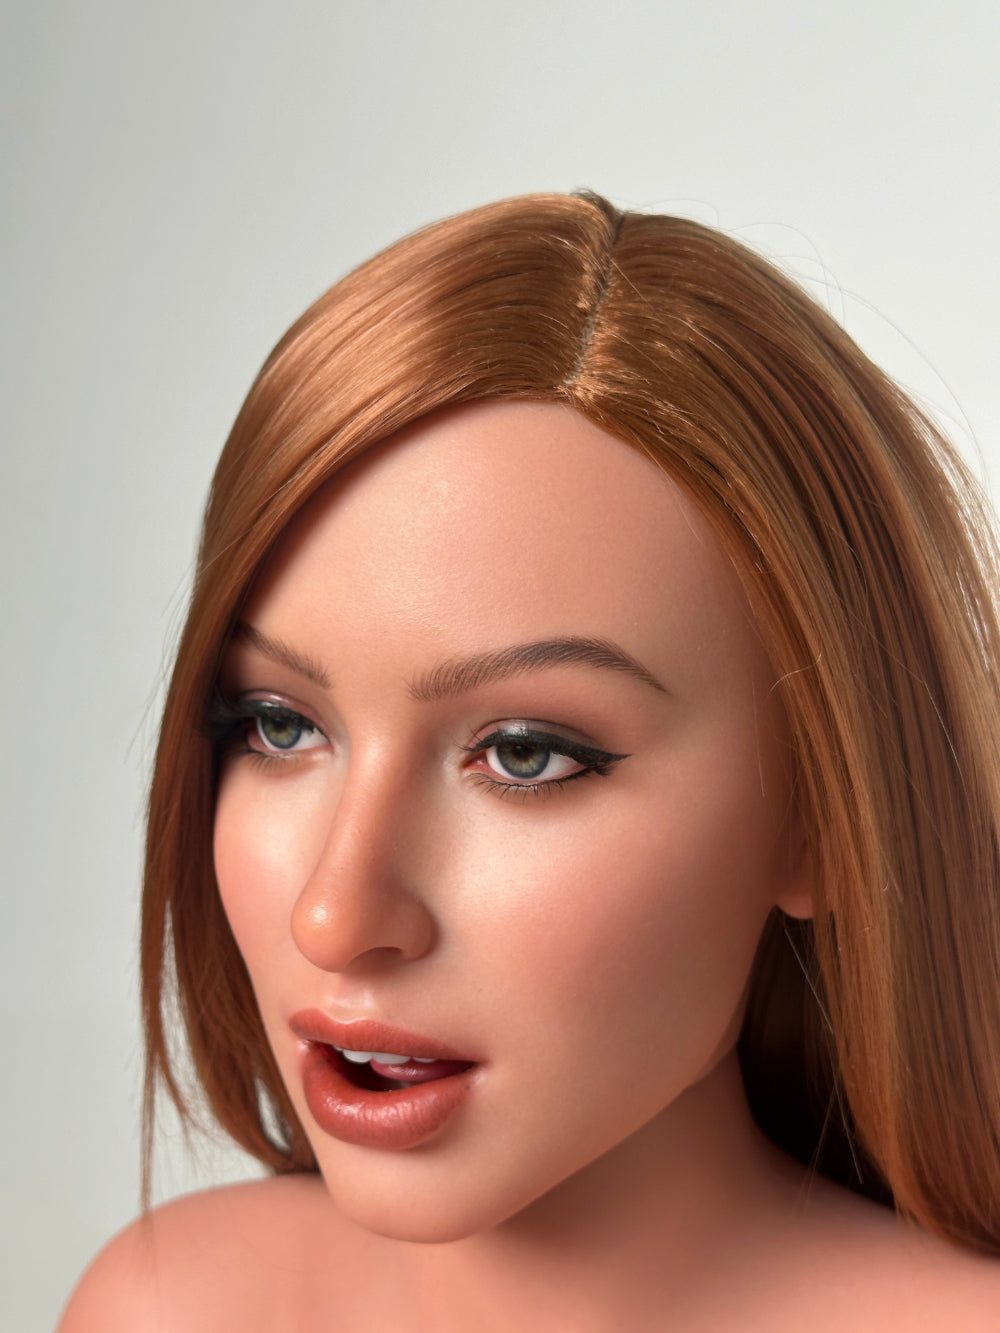 Zelex Doll SLE Series 153 cm B Silicone - ZXE208-3  Movable Jaw